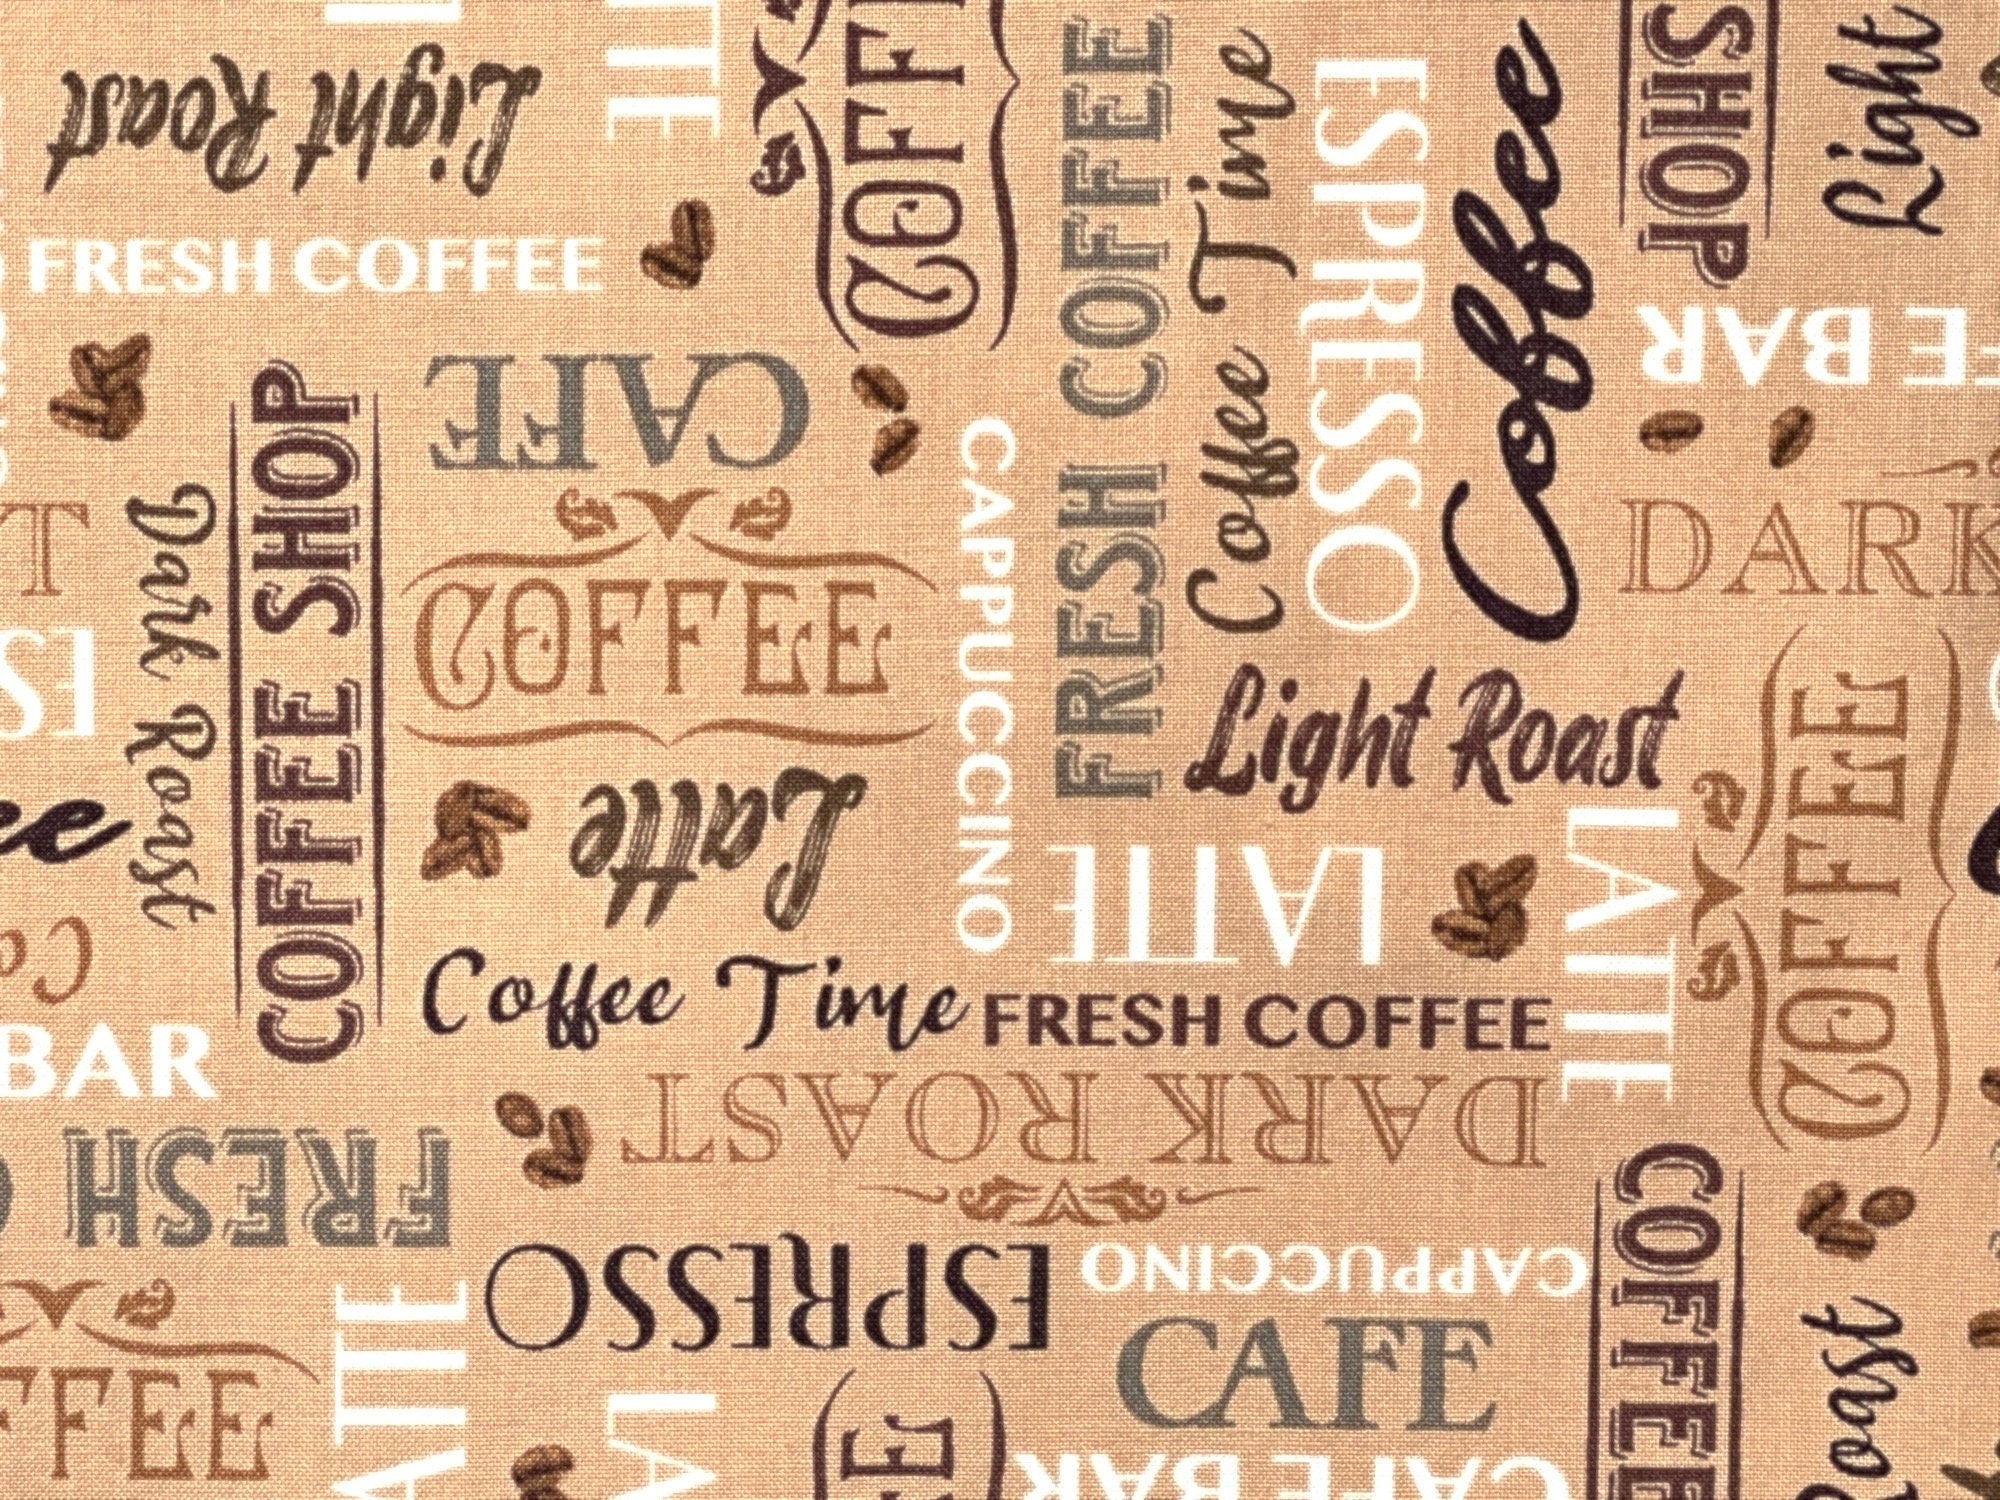 Close up of coffee sayings such as light roast, latte, fresh coffee, dark roast and more.